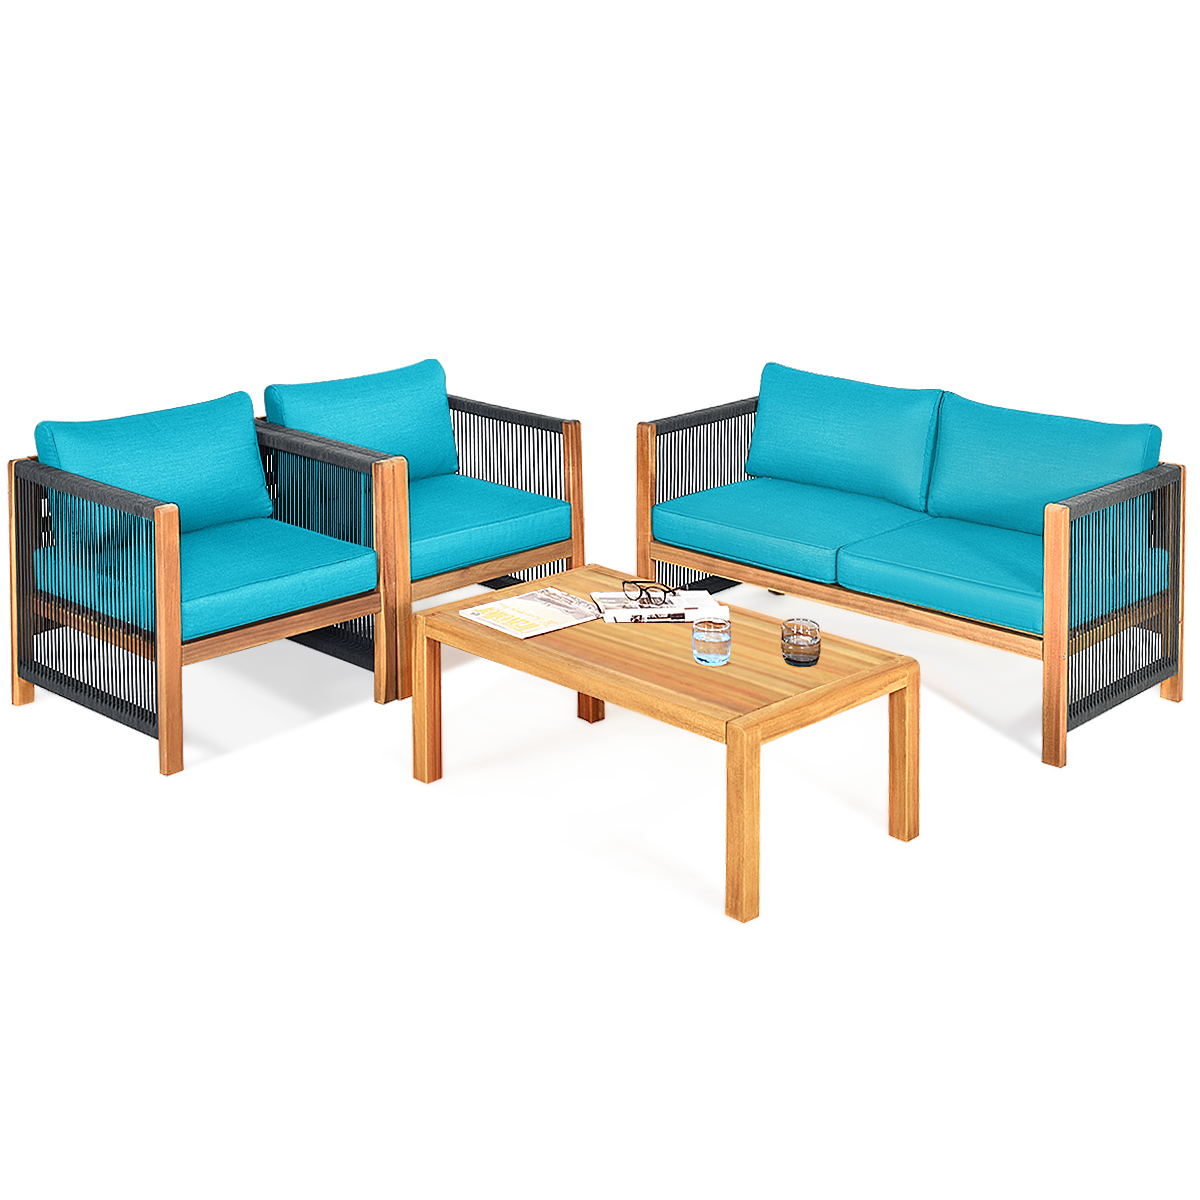 Patiojoy 4-Piece Outdoor Patio Wood Conversation Furniture Set Padded Chair with Coffee Table Turquoise - image 5 of 5